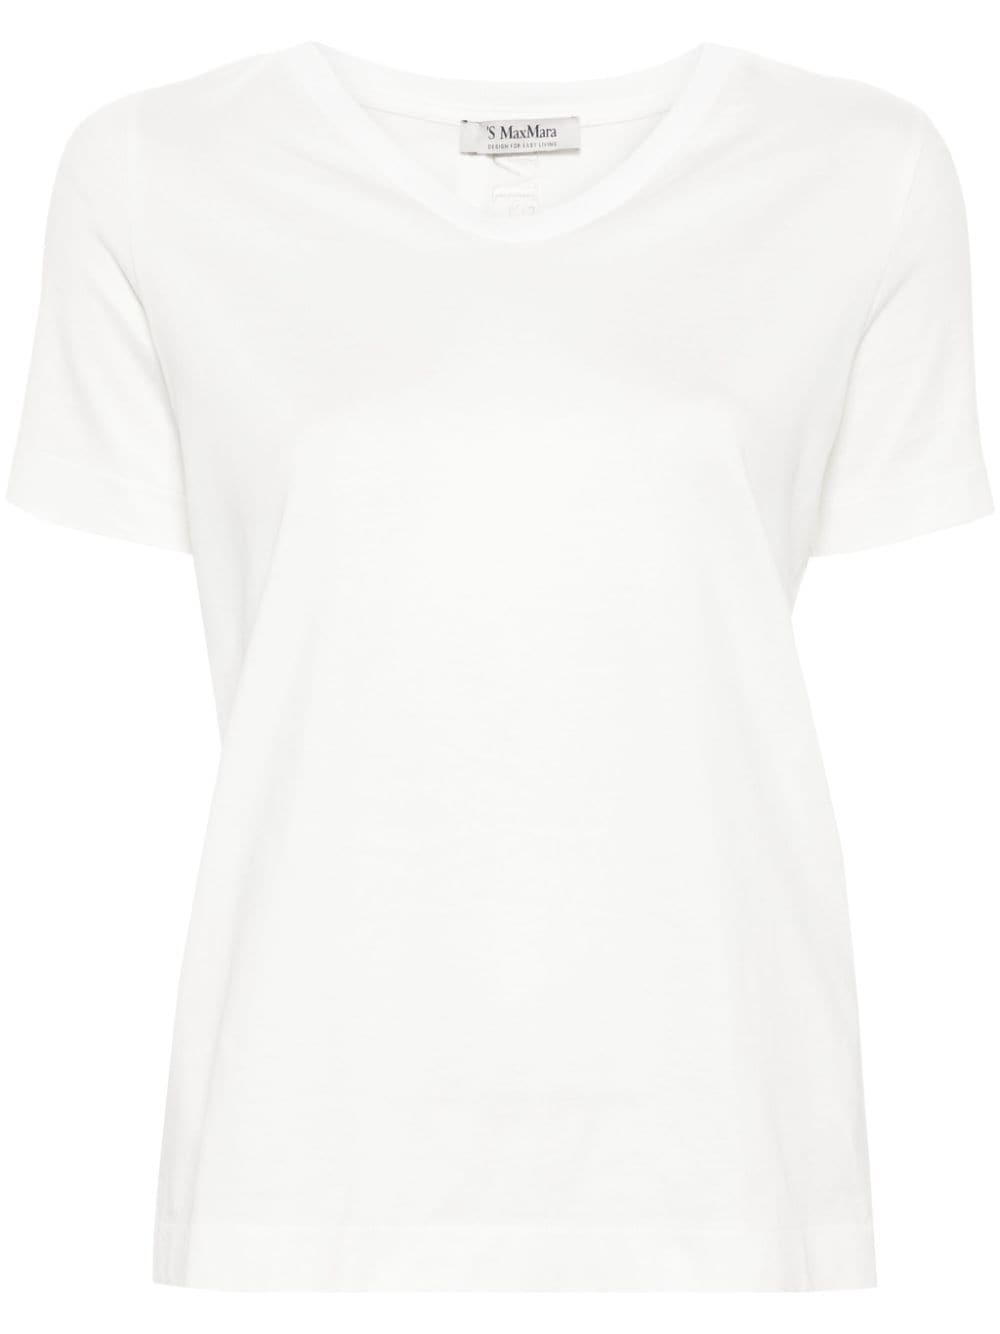 's Max Mara Embroidered-logo Cotton T-shirt In White